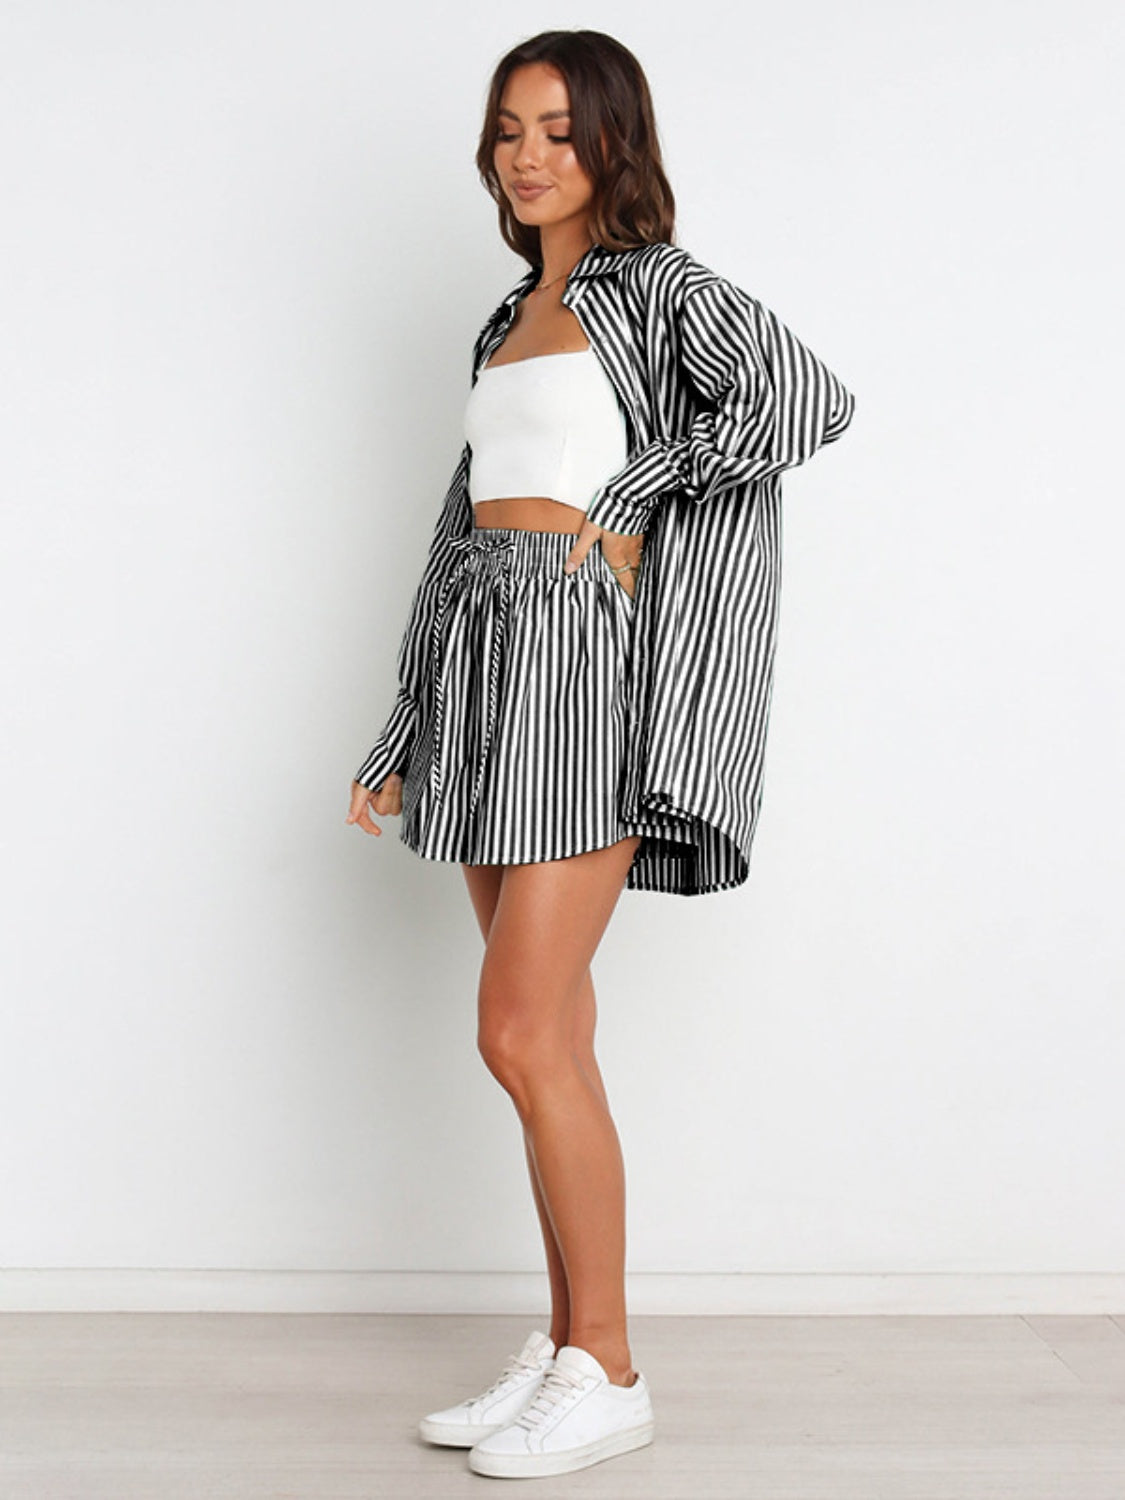 Classic Striped Dropped Shoulder Shirt with Matching Shorts Set